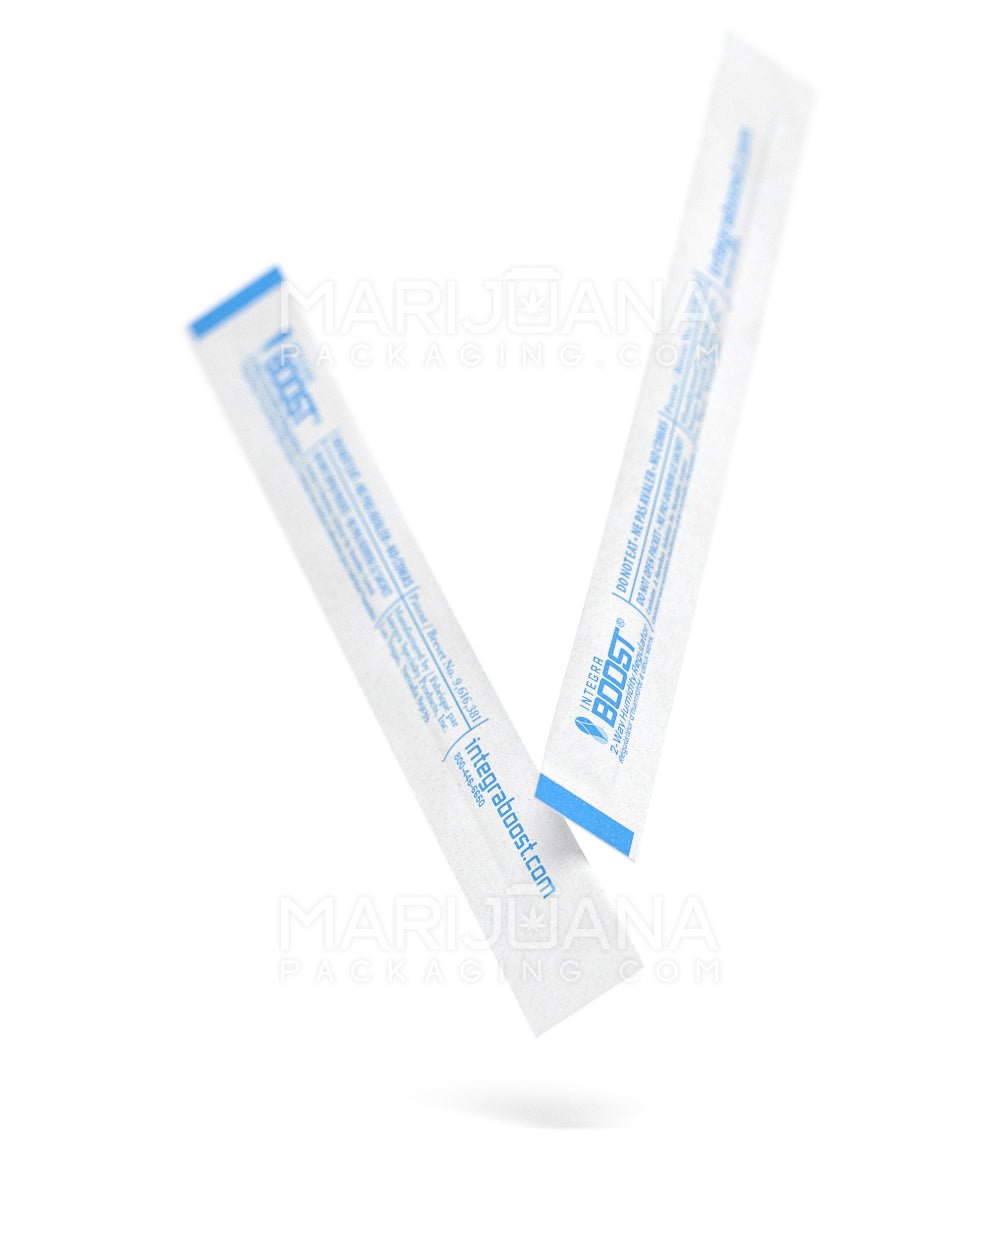 INTEGRA | Boost Pre-Roll Humidity Packs | 110mm - 62% - 100 Count - 4